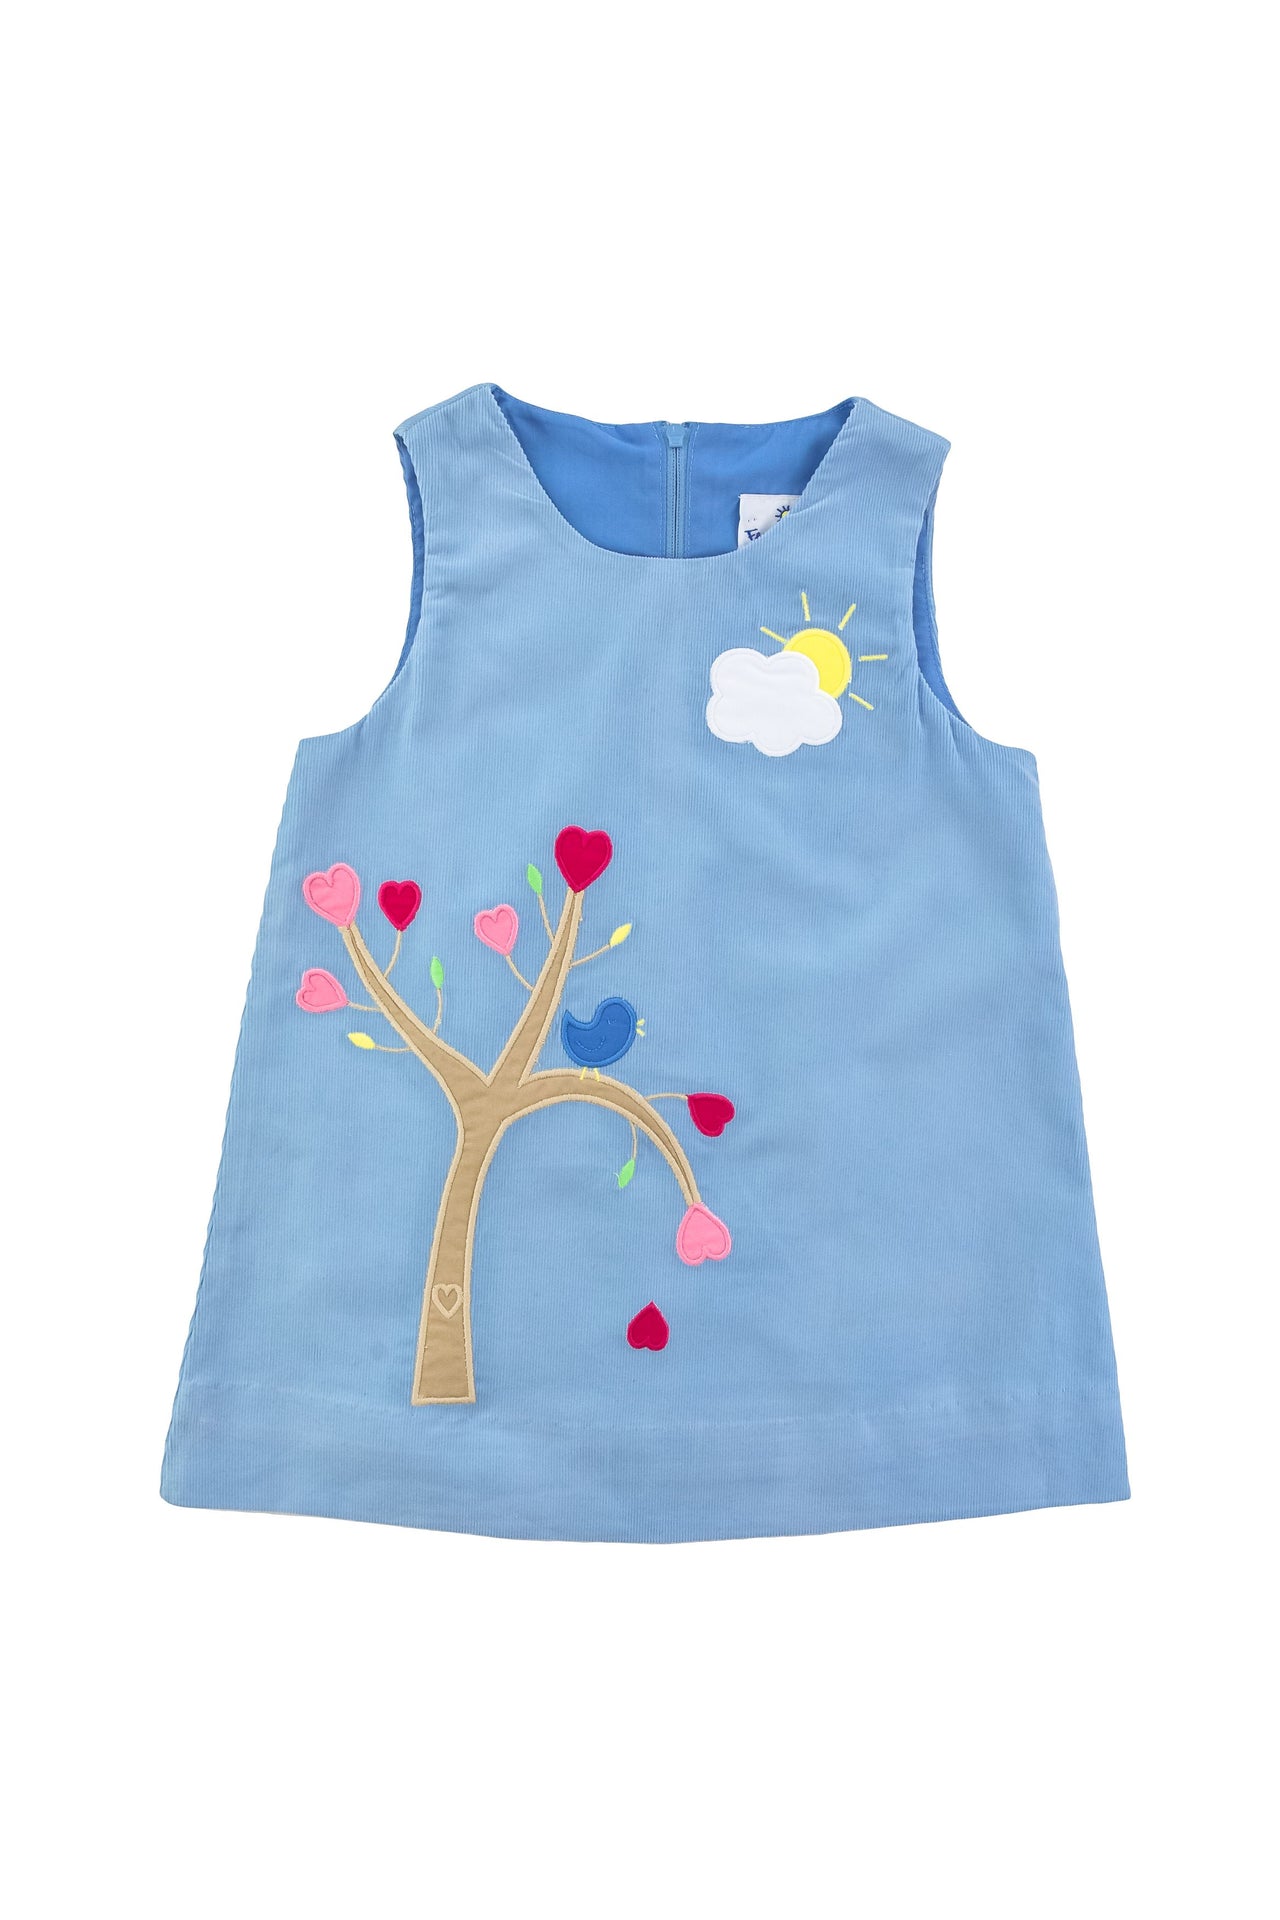 Florence Eiseman Med Blue Jumper W/Heart Tree and Bird F4925 5007